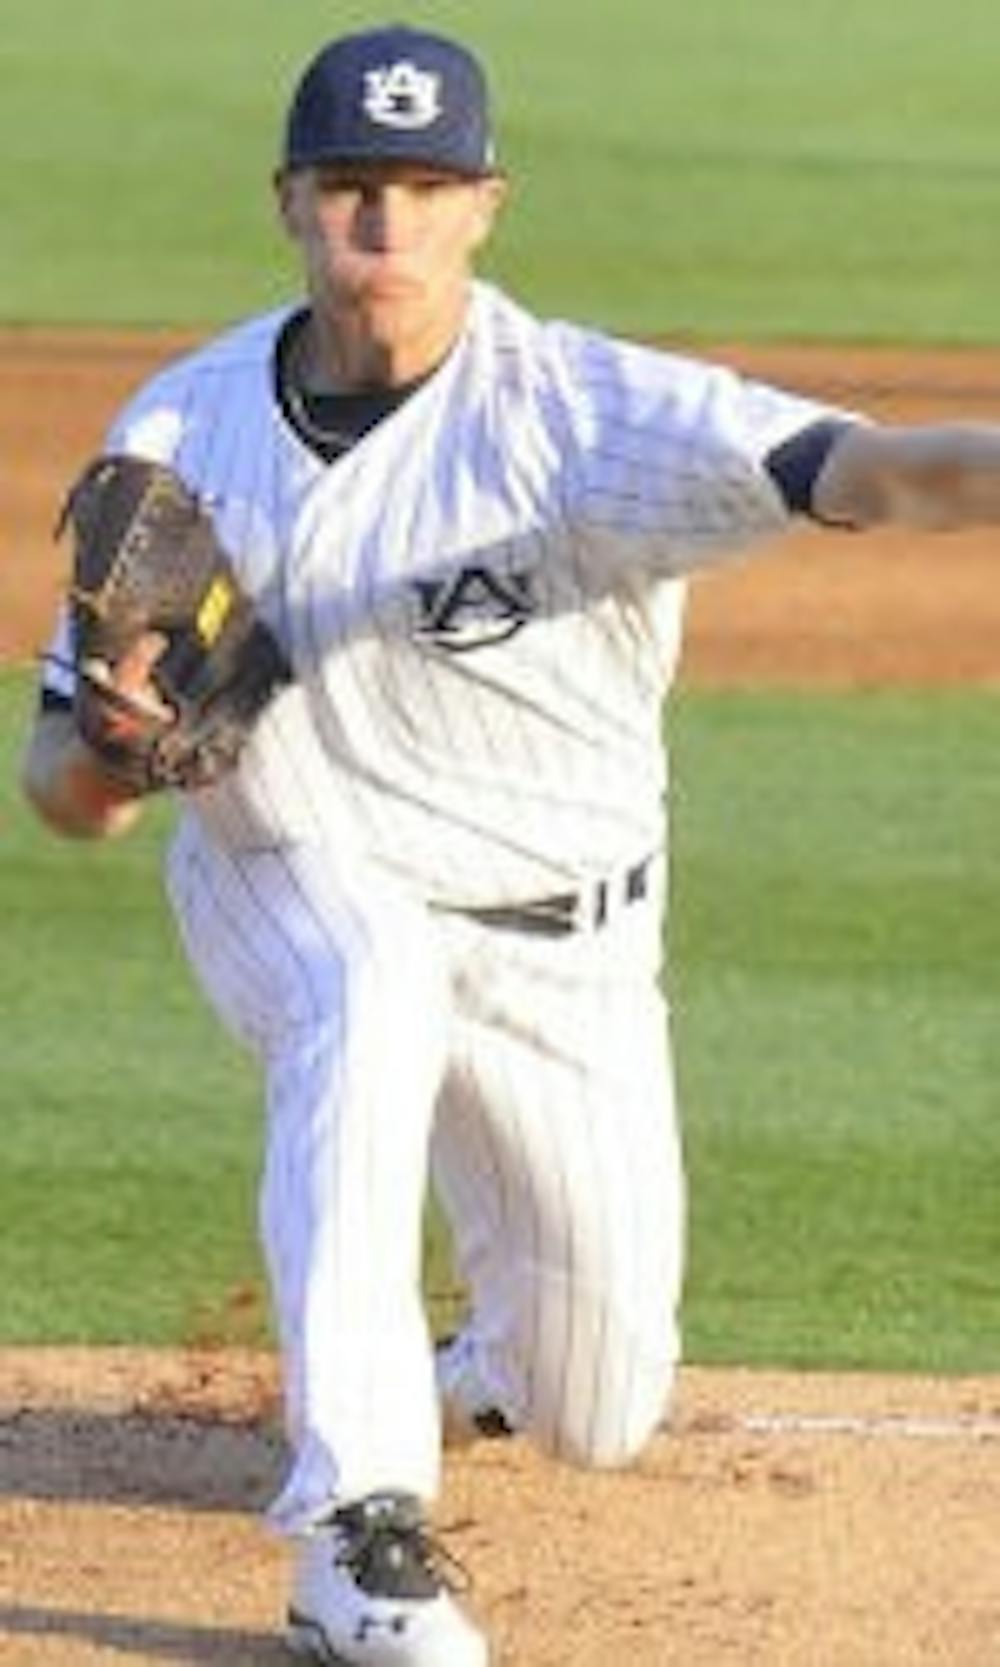 Michael O'Neal rounding out a pitch against Georgia. (Courtesy of Auburn Athletics)